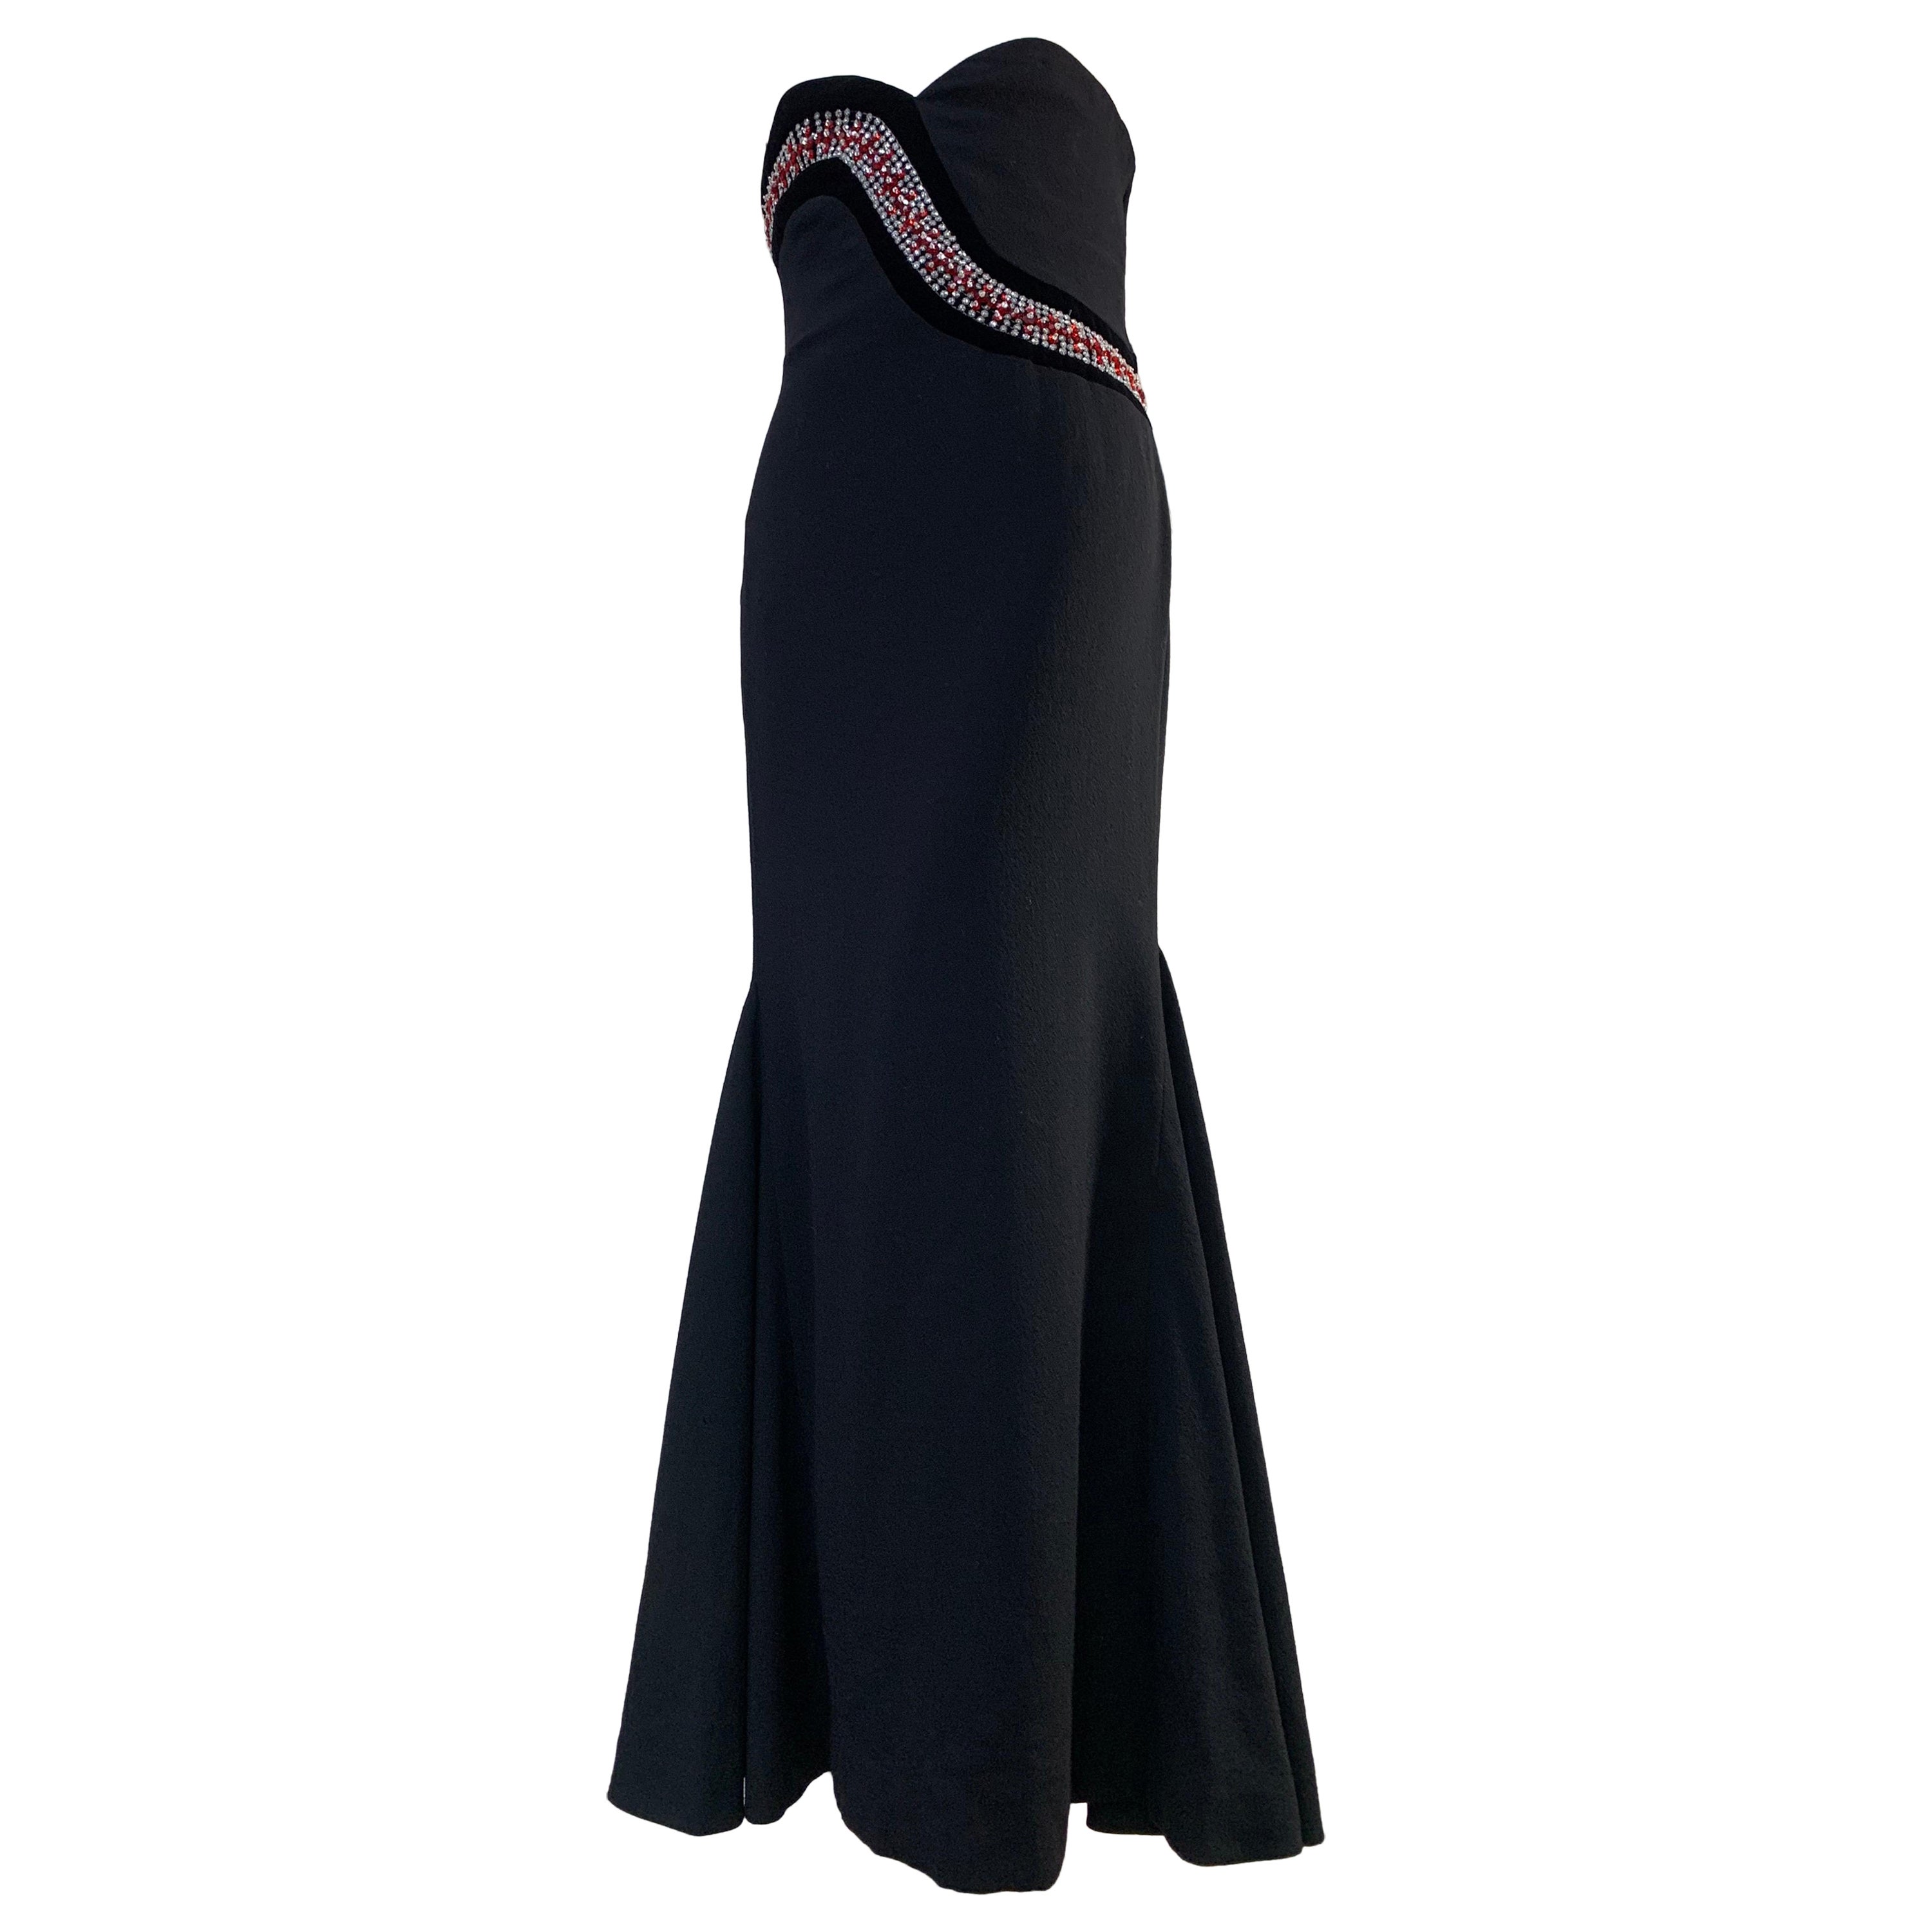 1980s James Galanos Strapless Fishtail Black Wool Crepe Gown w/ Sinuous Crystals For Sale